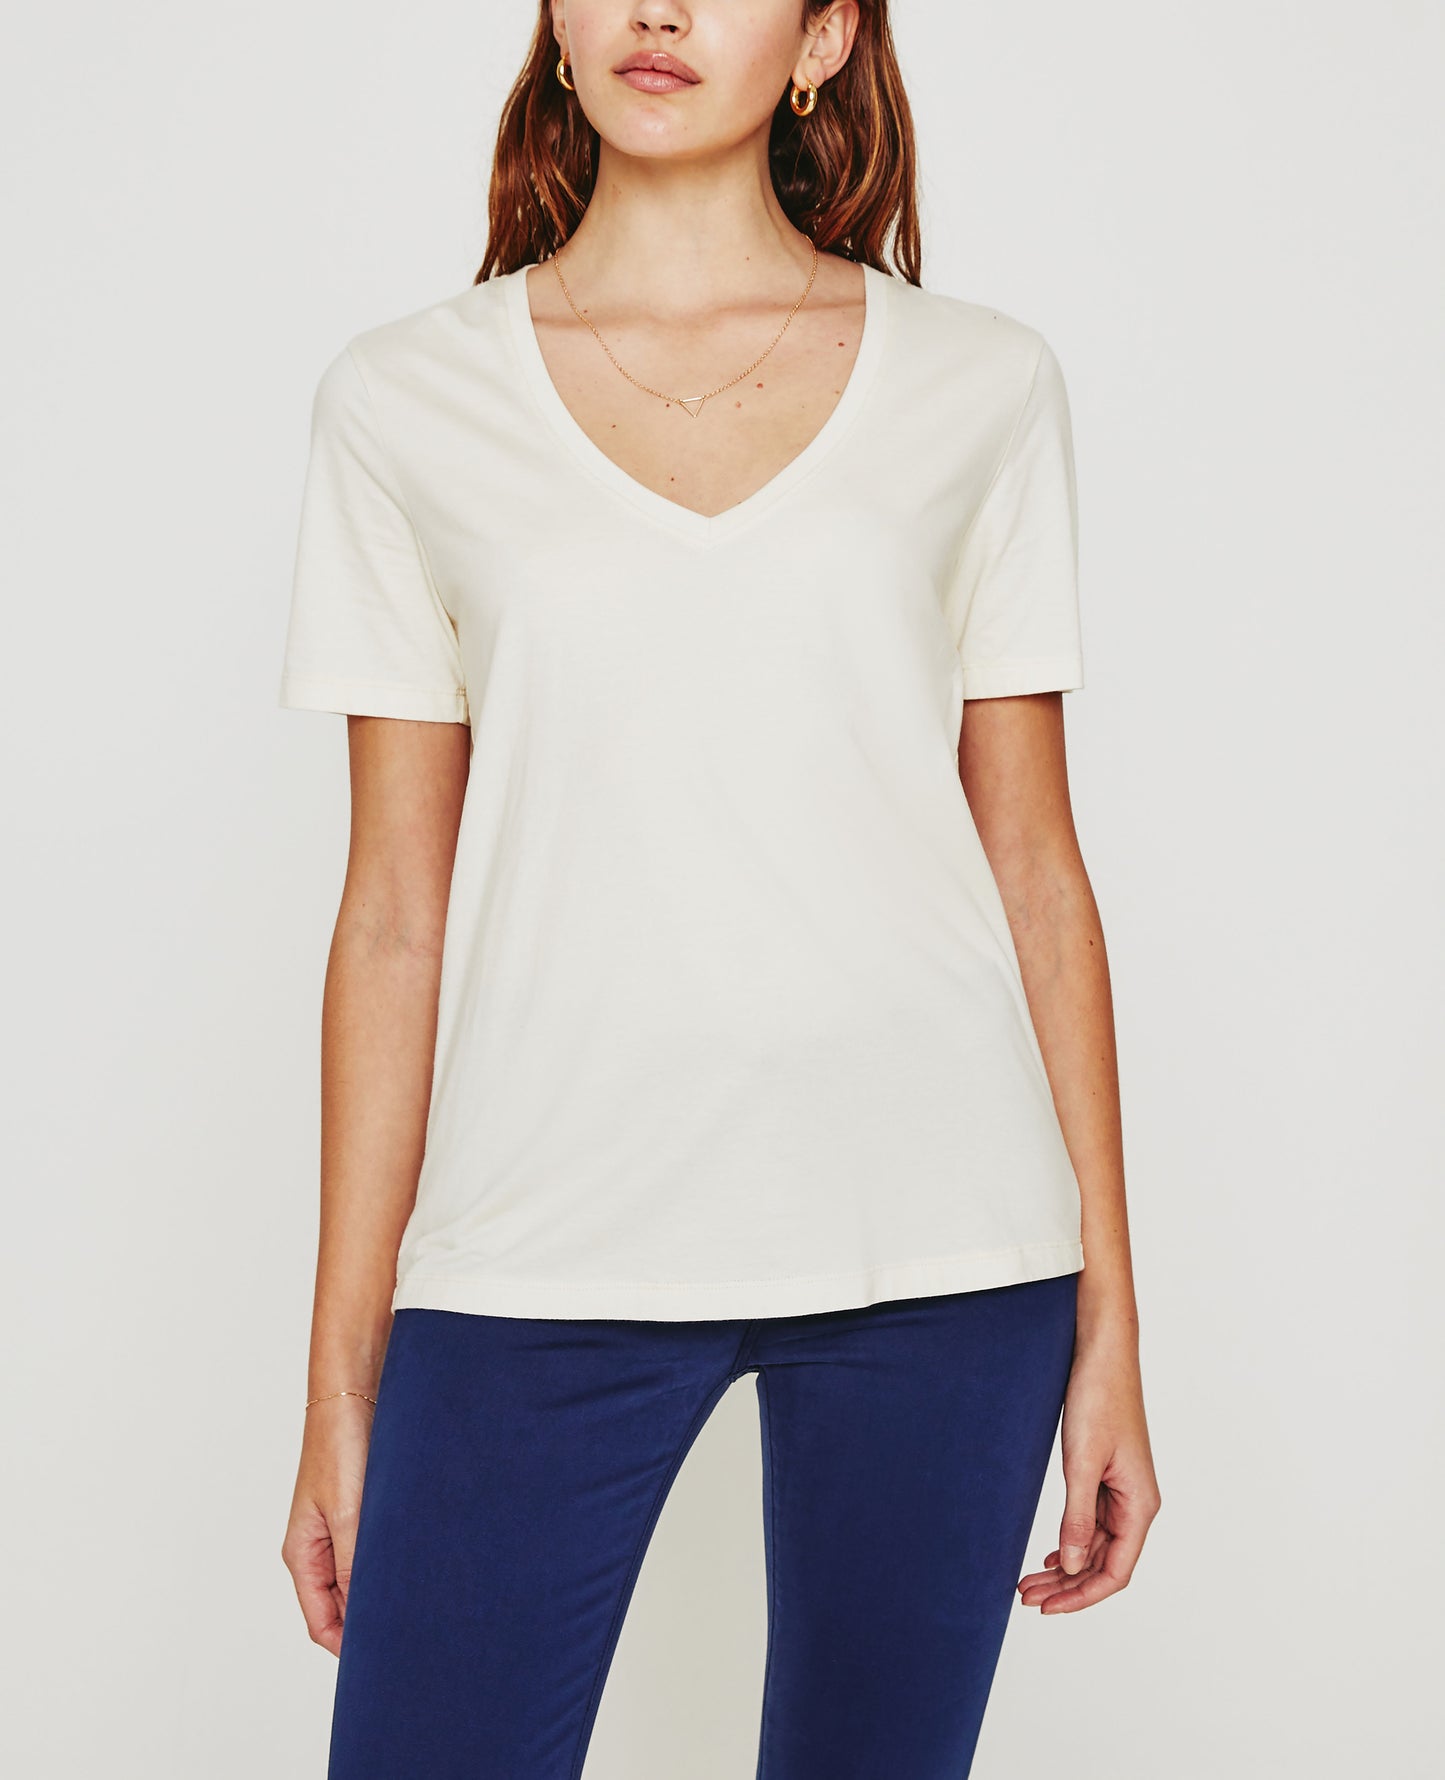 Jagger Vee Ivory Dust Classic Fit V-Neck Tee Women Tops Photo 1